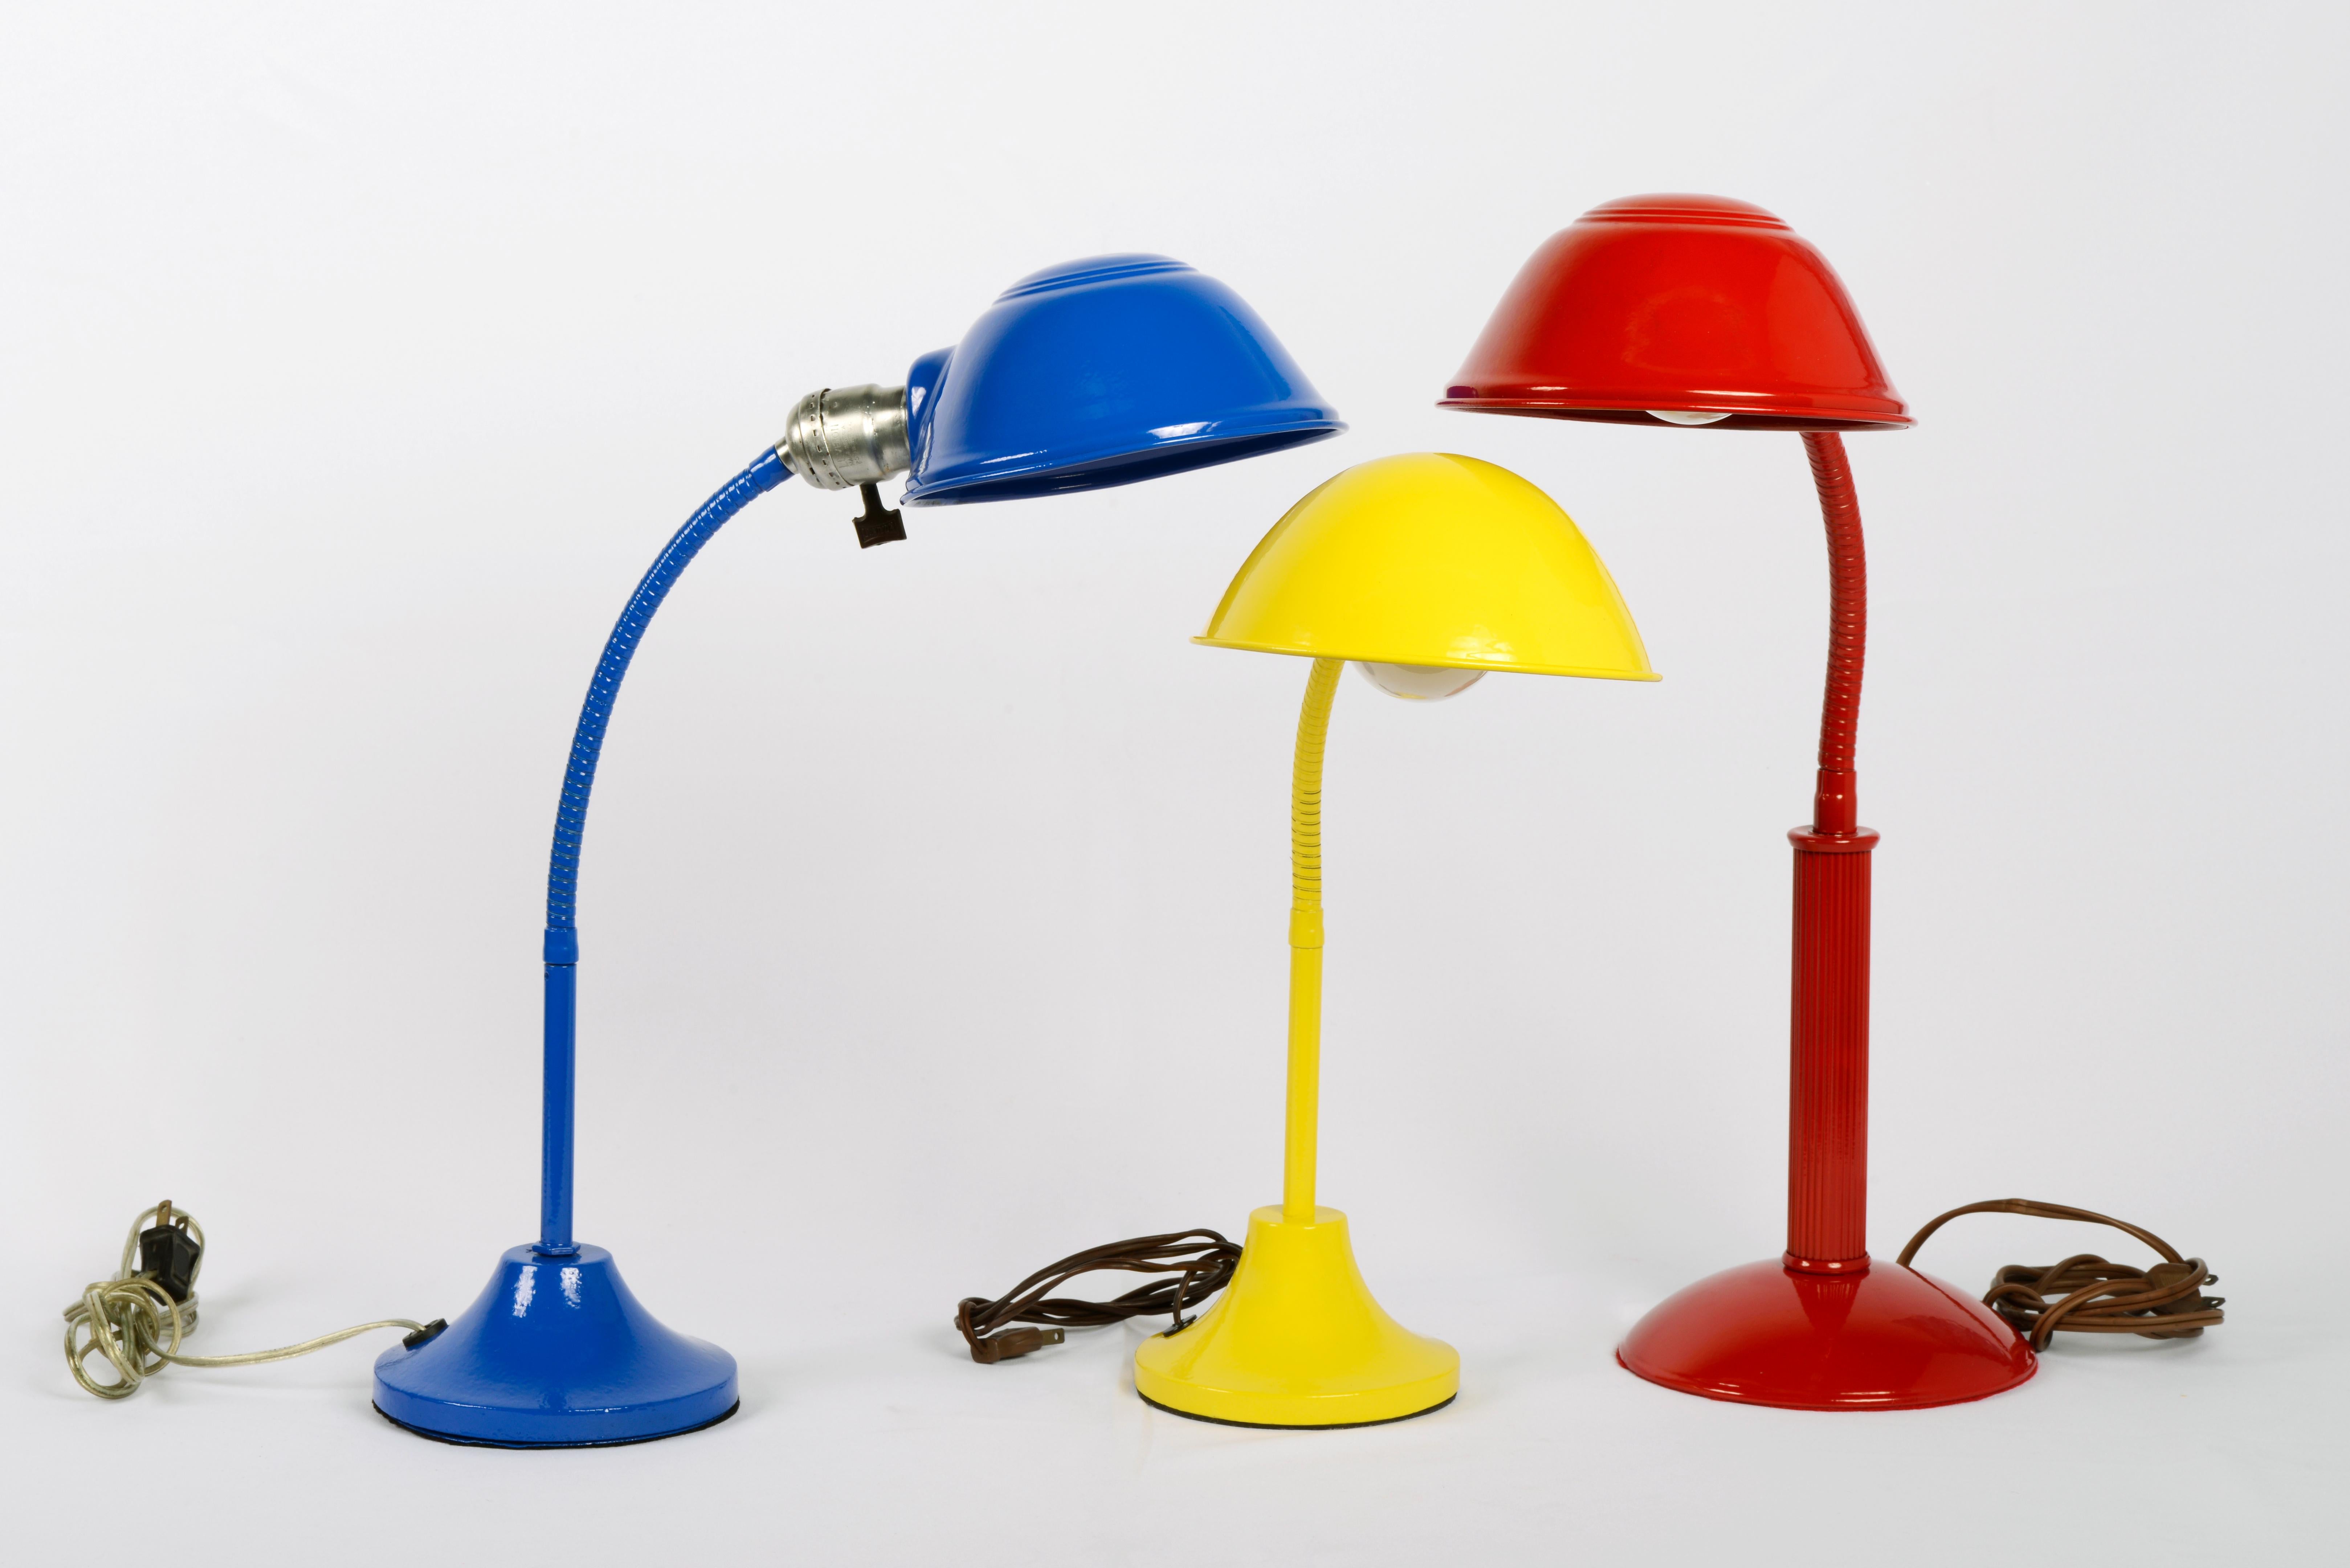 Powder-Coated 1960s Gooseneck Desk Lamp Refinished in Fire Engine Red